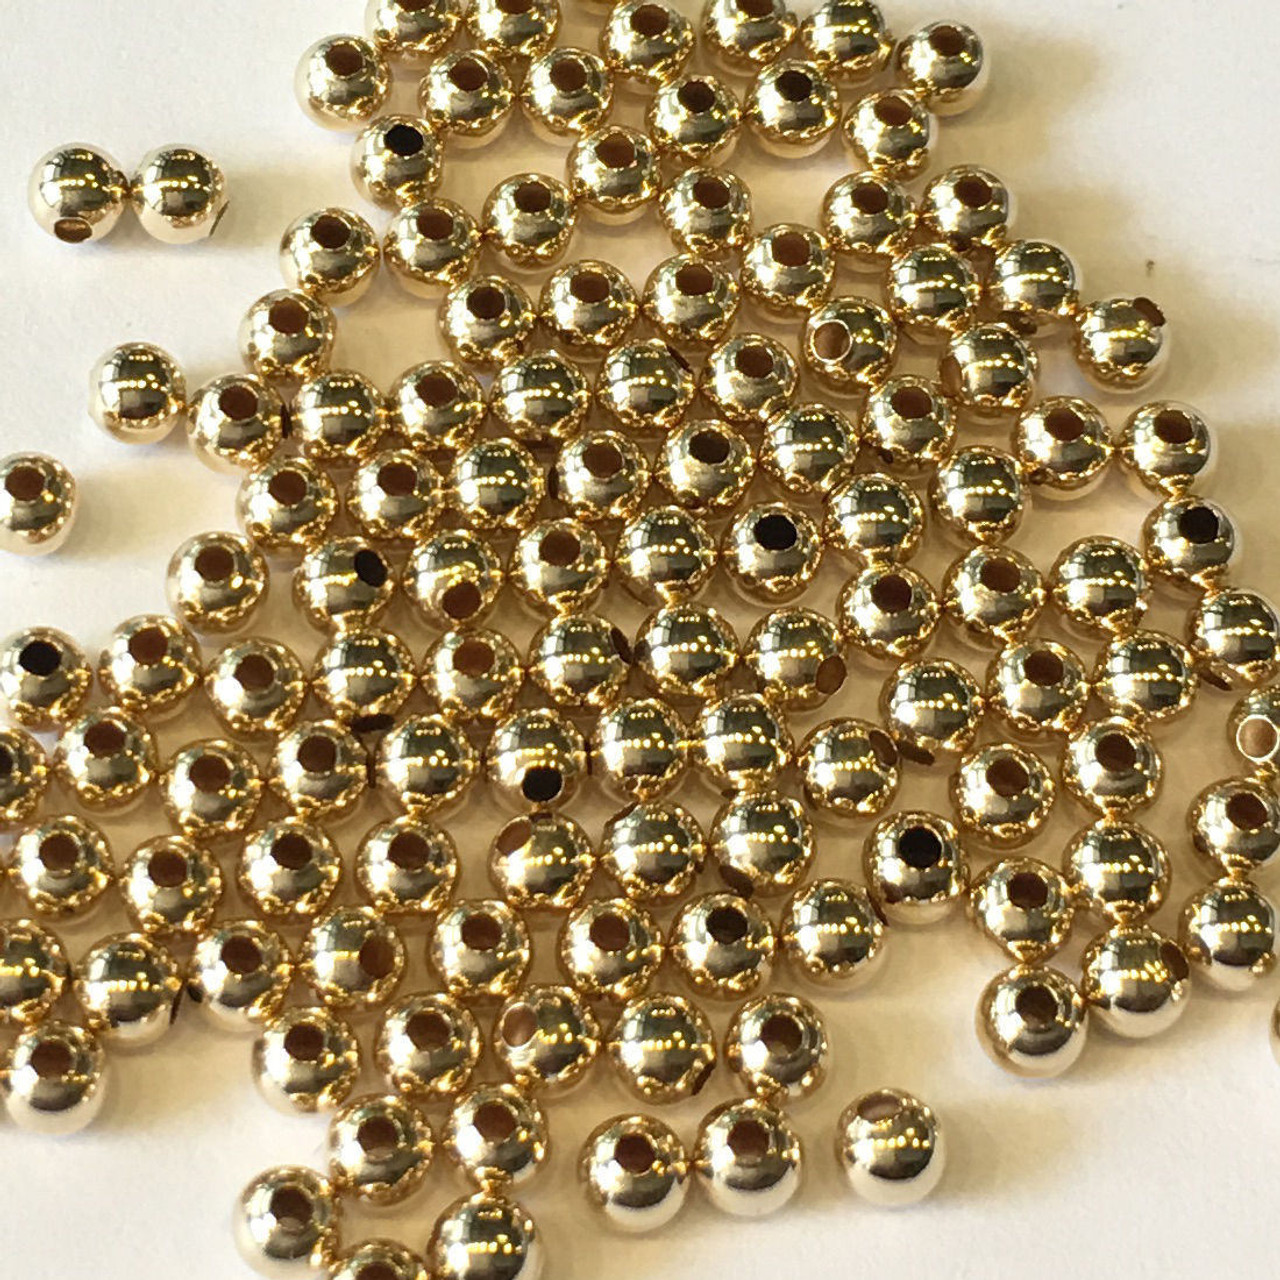 10 Ribbed round beads Gold plated beads (6mm) G24392